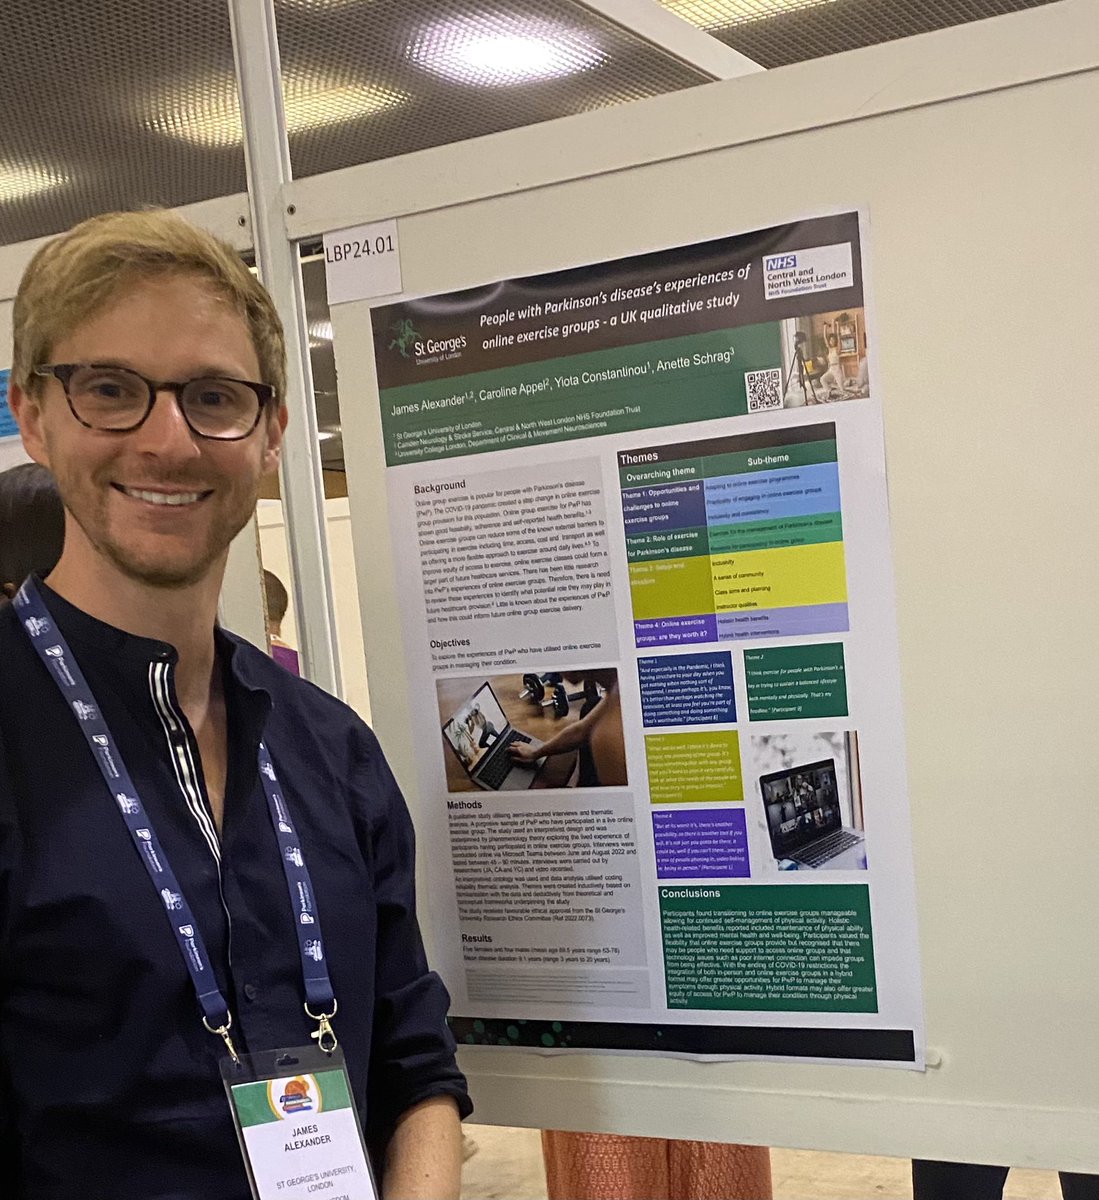 Interested in understanding more about online exercise groups for PD? Come chat to me @WorldPDCongress #wpc2023 #SGUL #CNWL @cnwl @StGeorgesUni